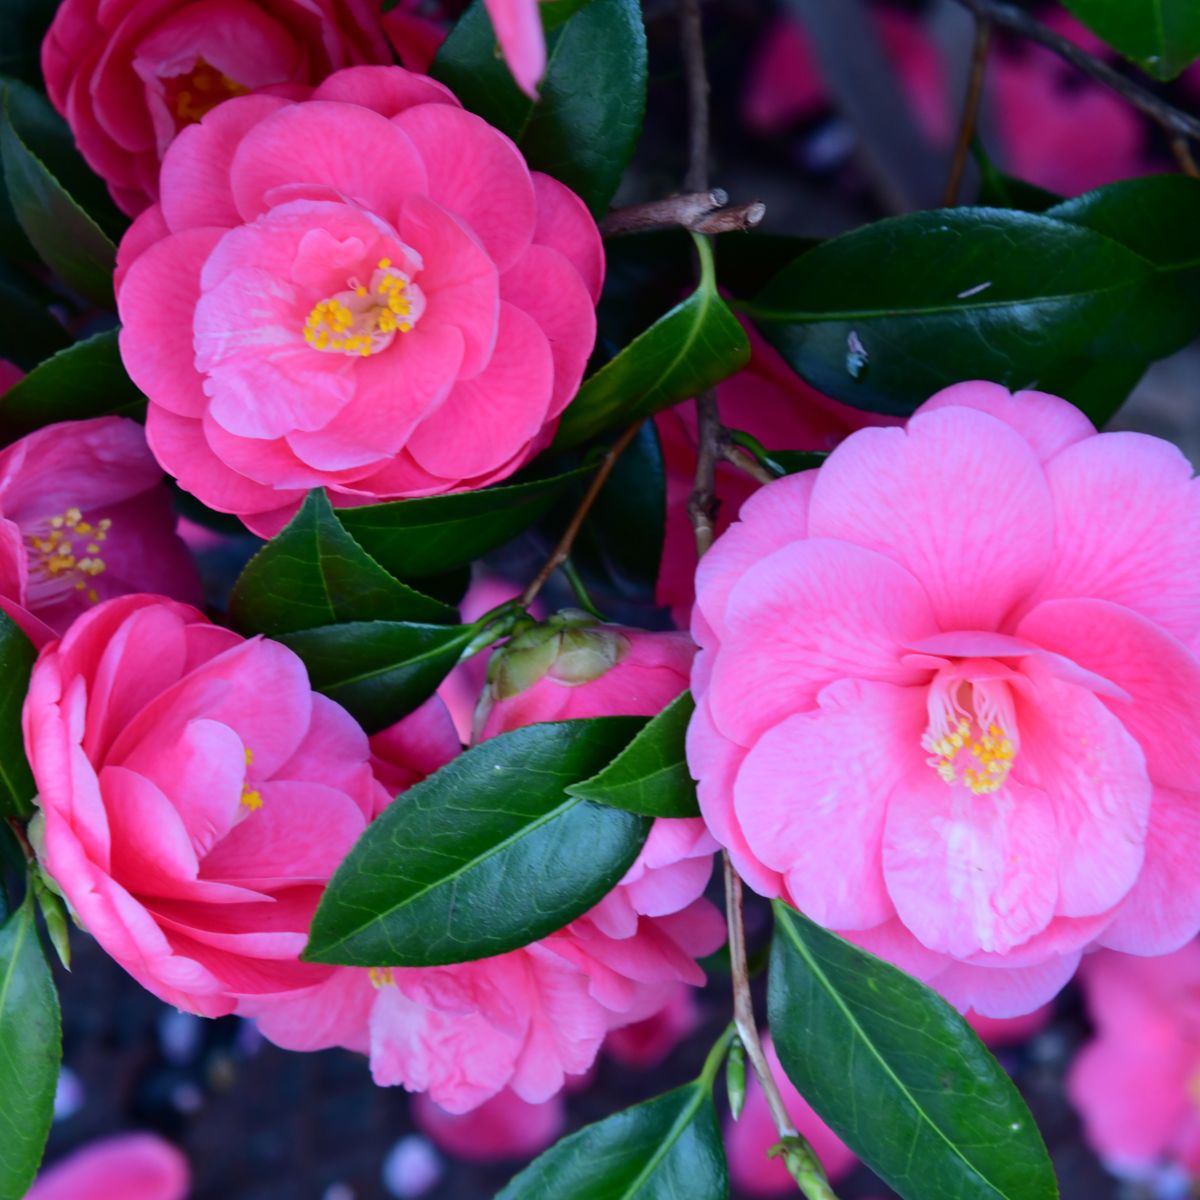 Beautiful bright pink camellia flowers.